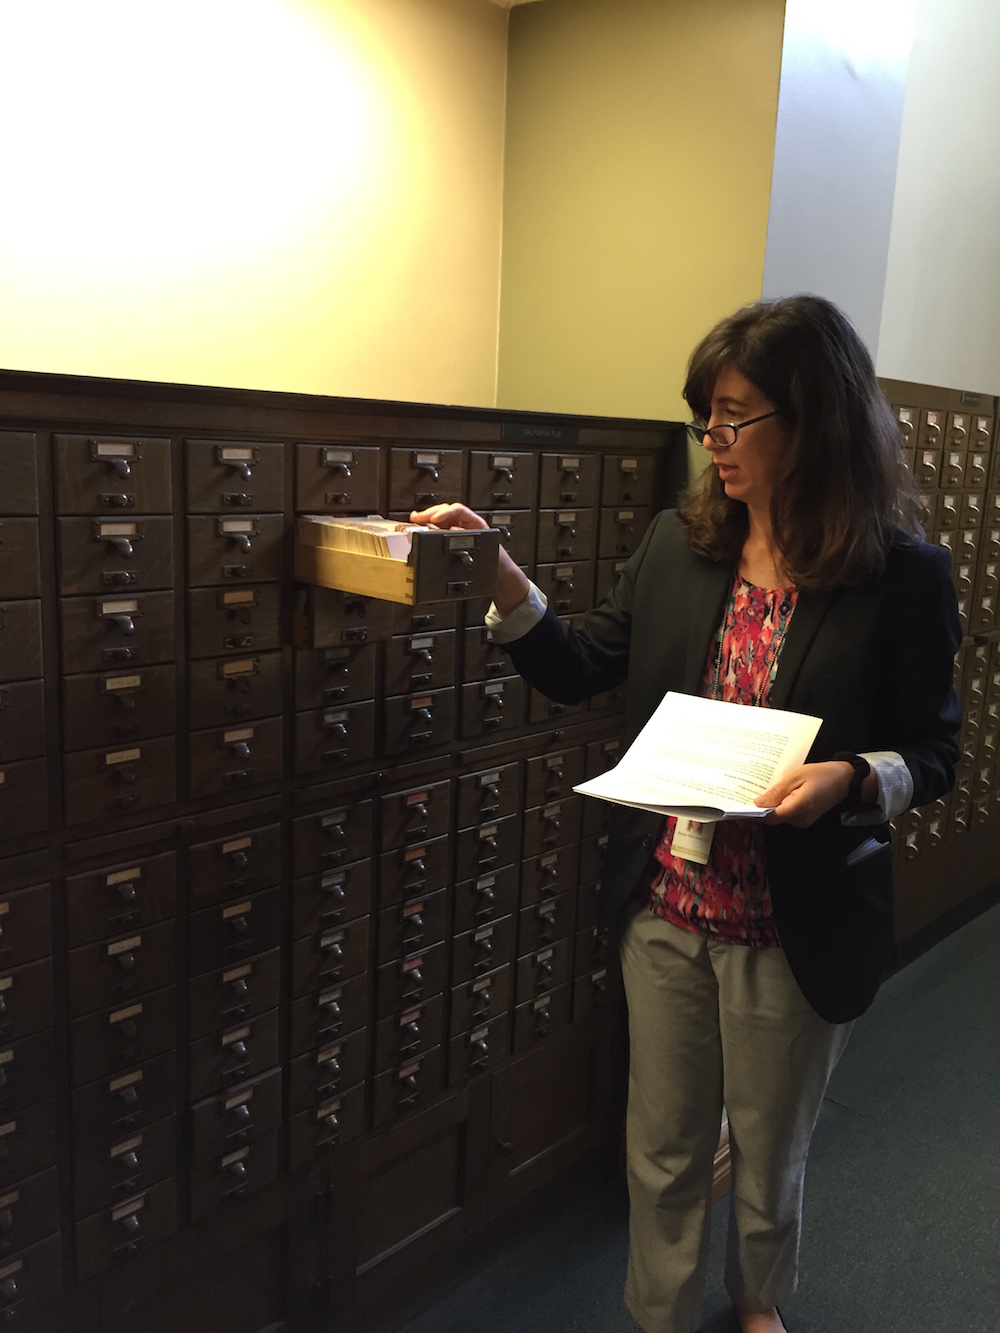 Our Tour Guide & Reader Services Librarian Anne Blecksmith, showing off the card catalog.